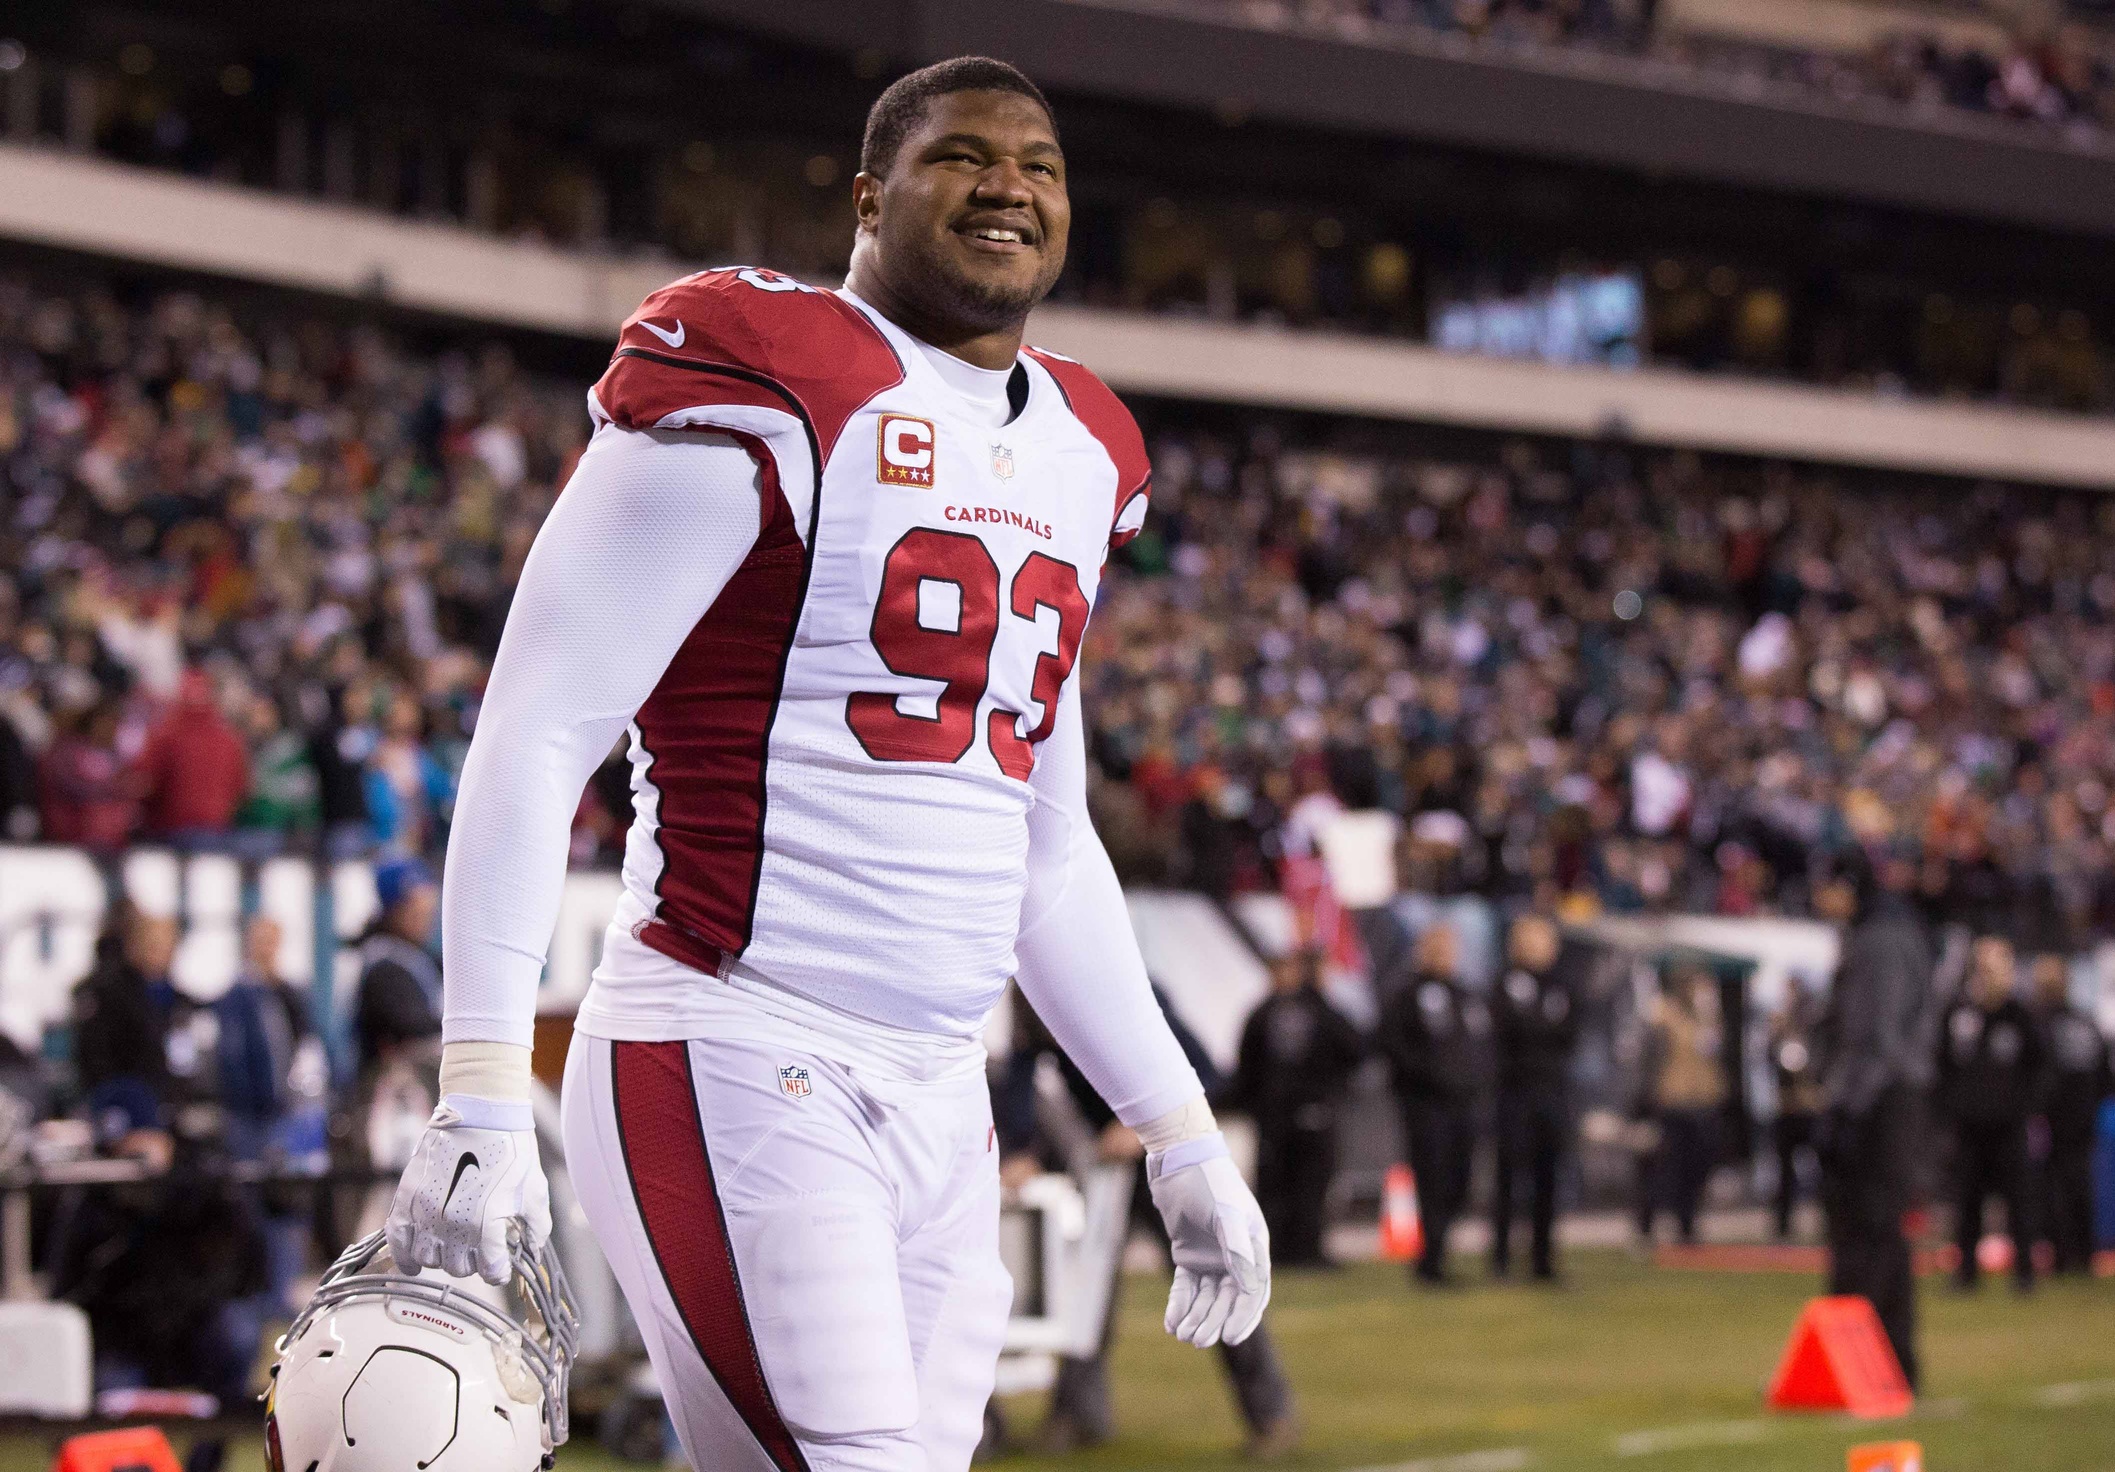 Could Calais Campbell land with the Redskins?